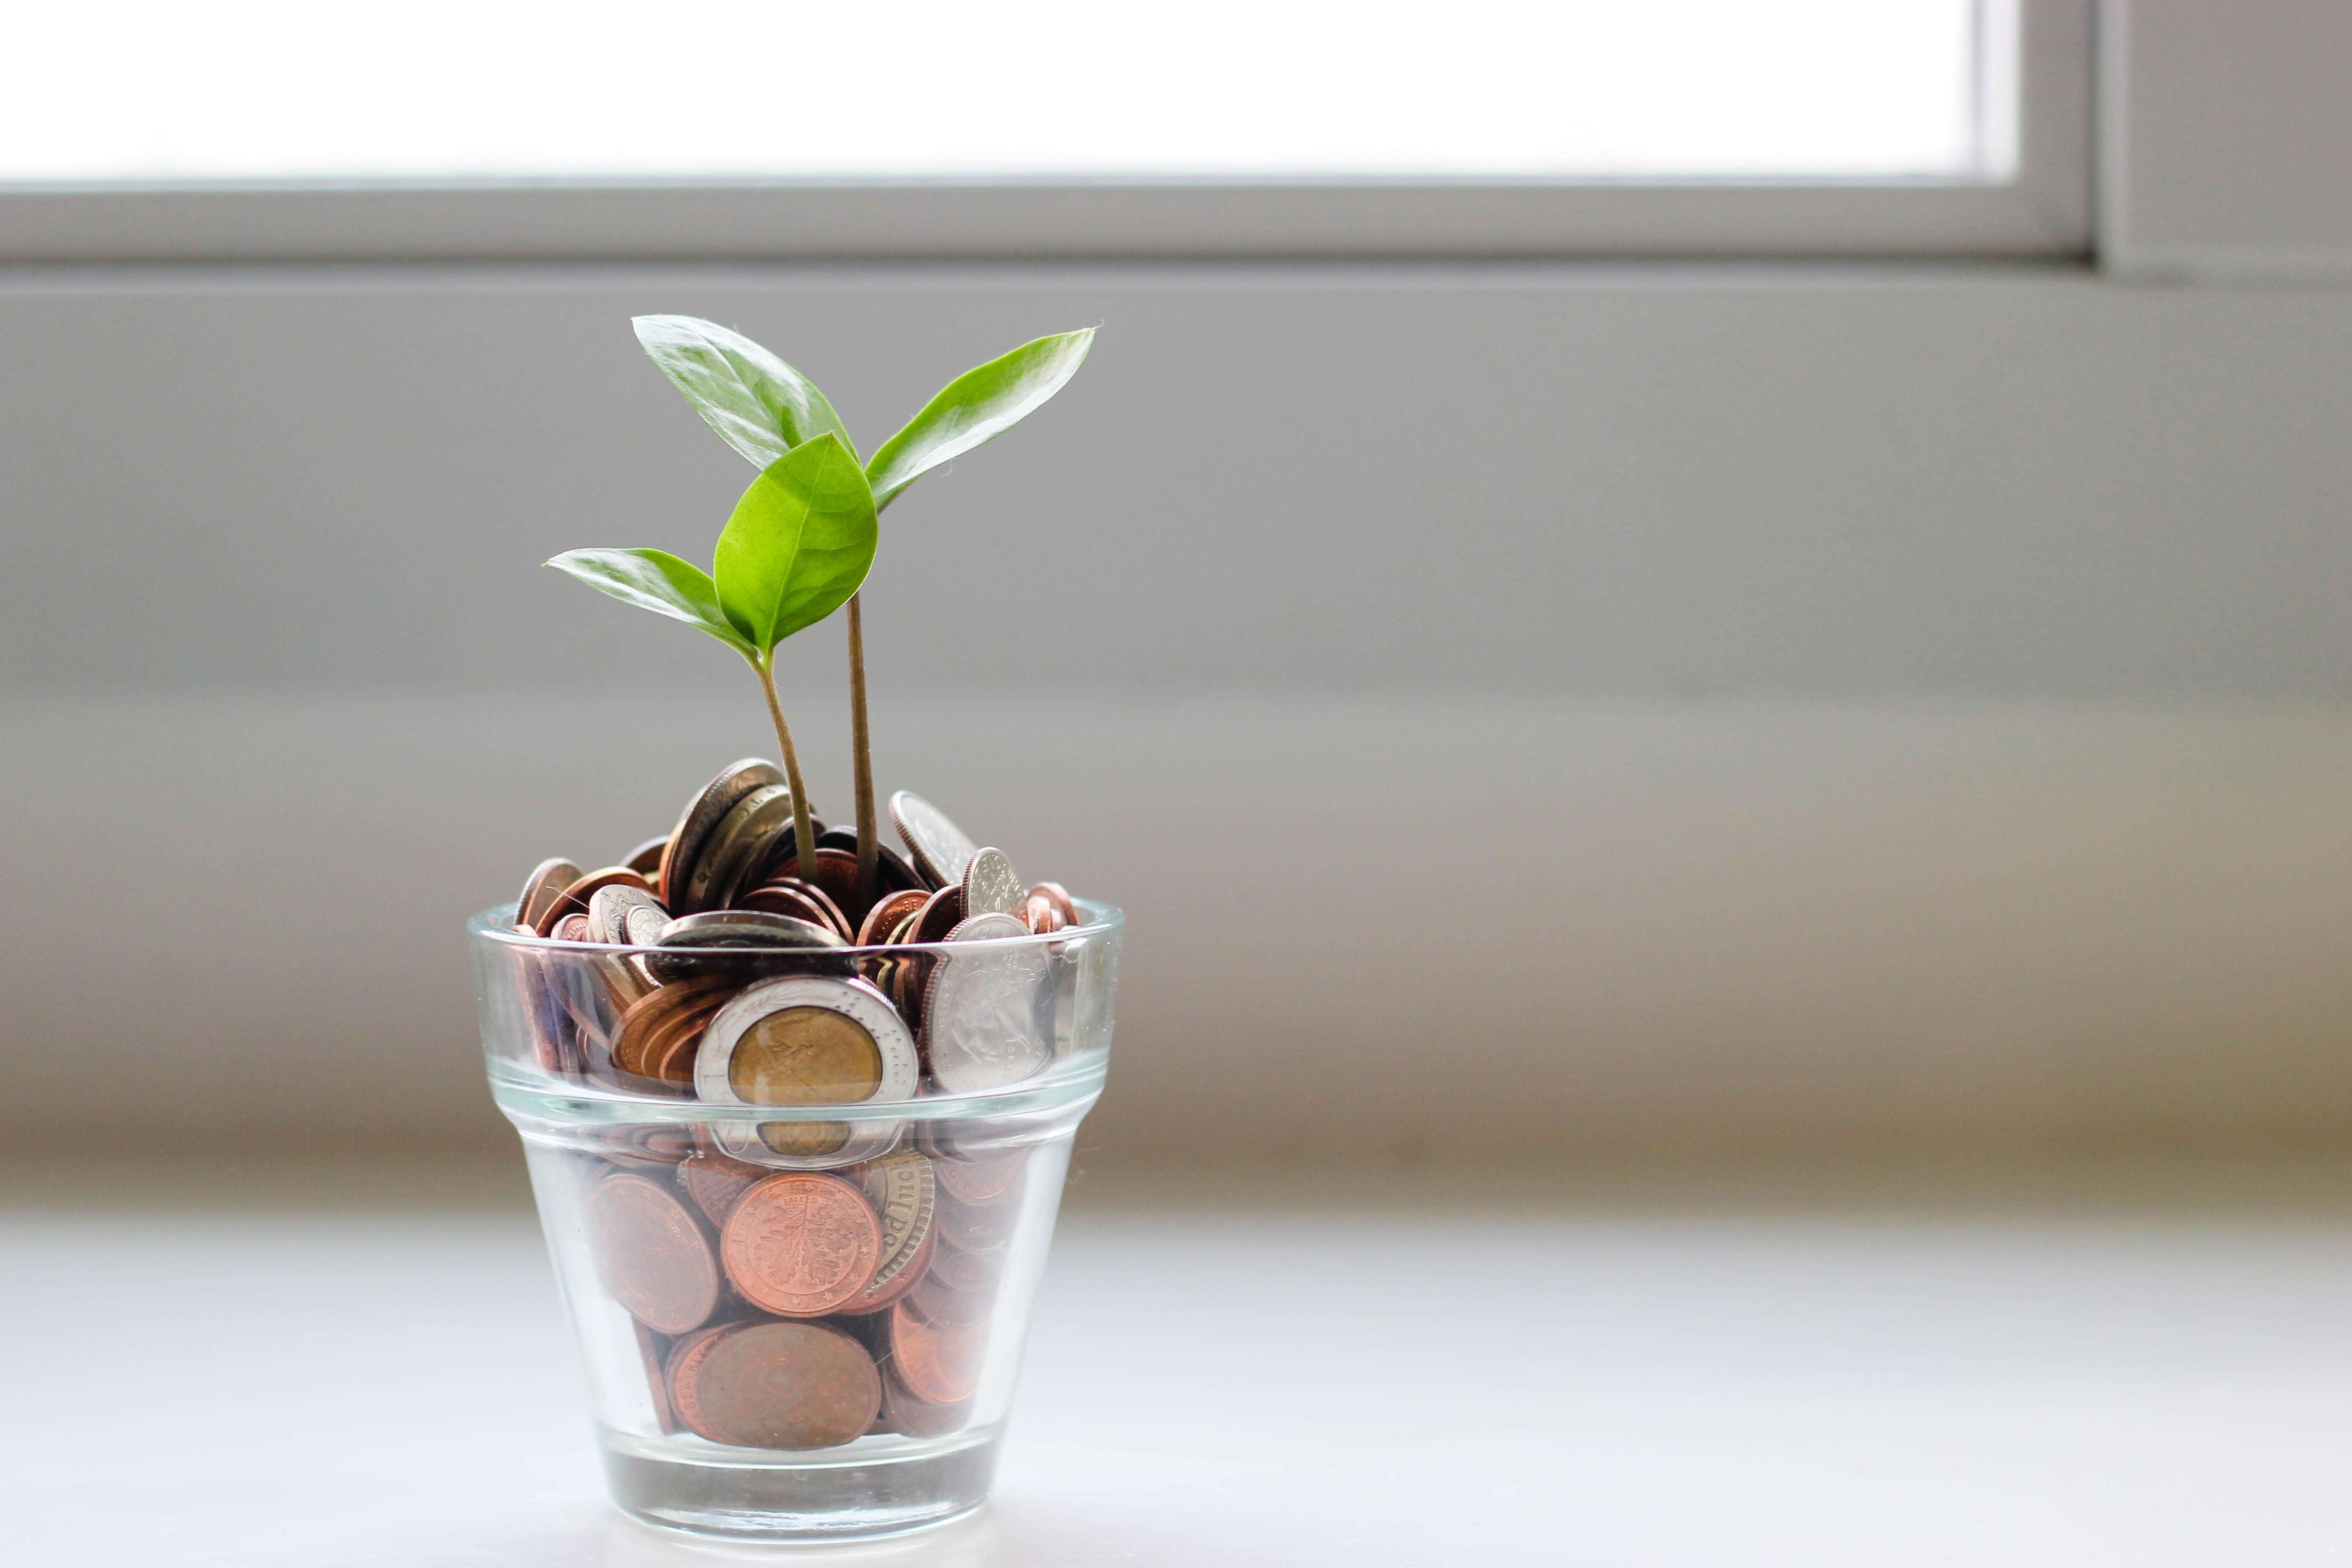 Concept of savings account, coins with a little growing plant